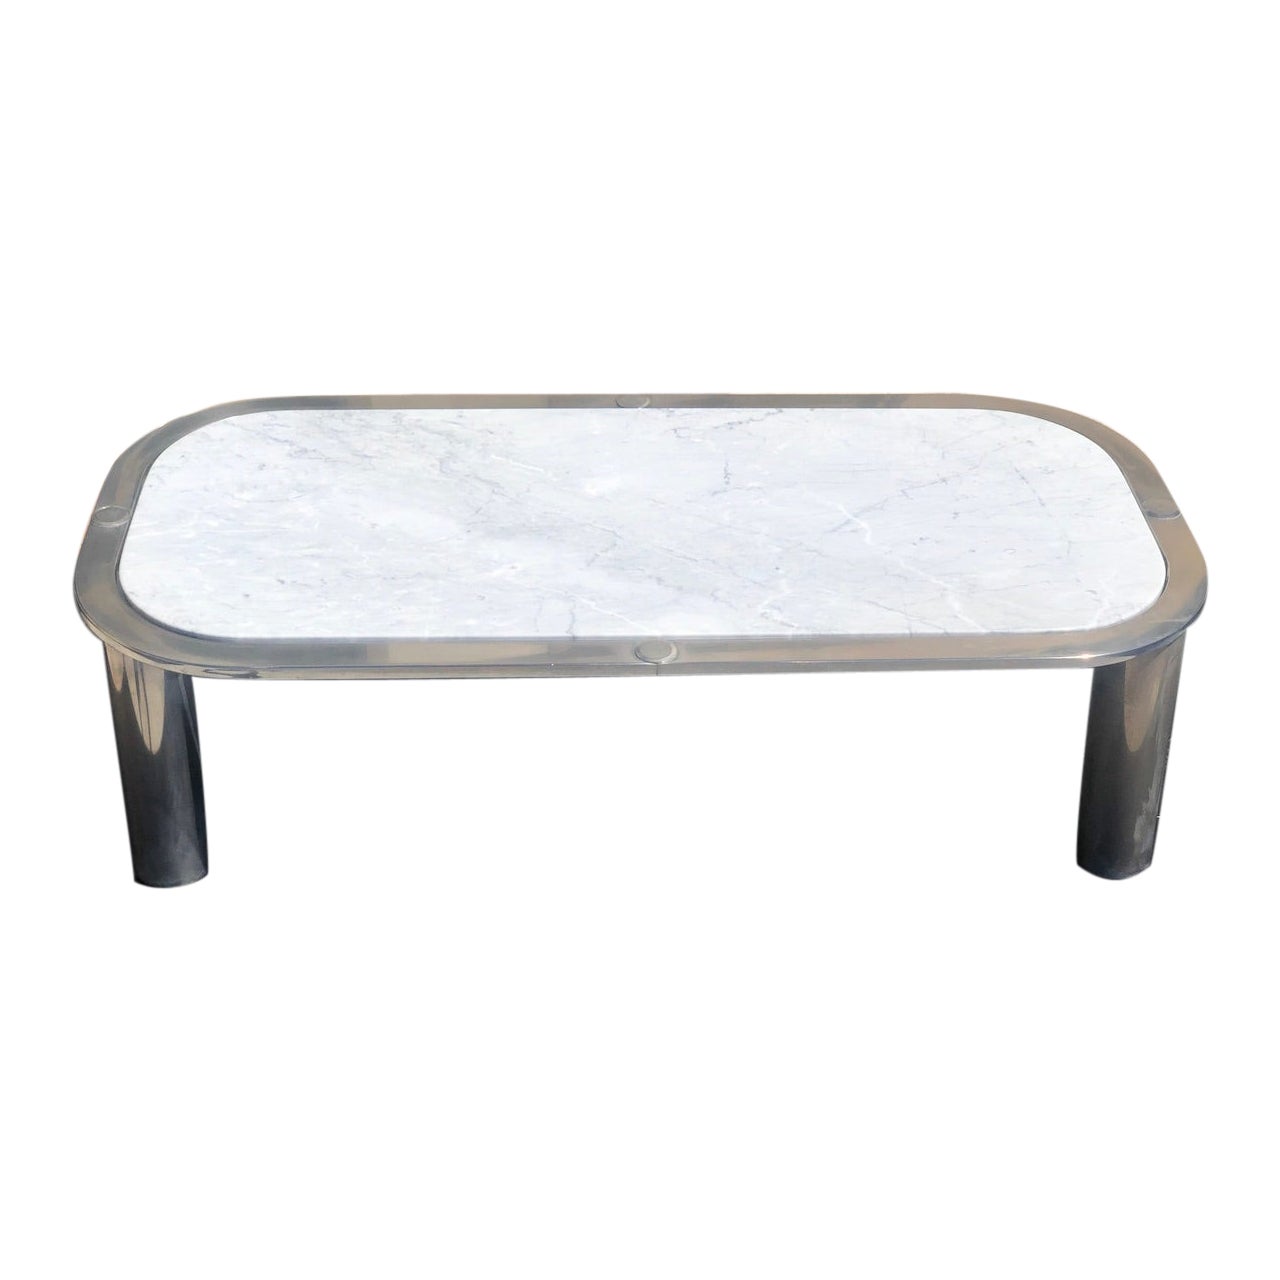 20th Century Italian Design Marble and Chrome Steel Coffee Table, 1970